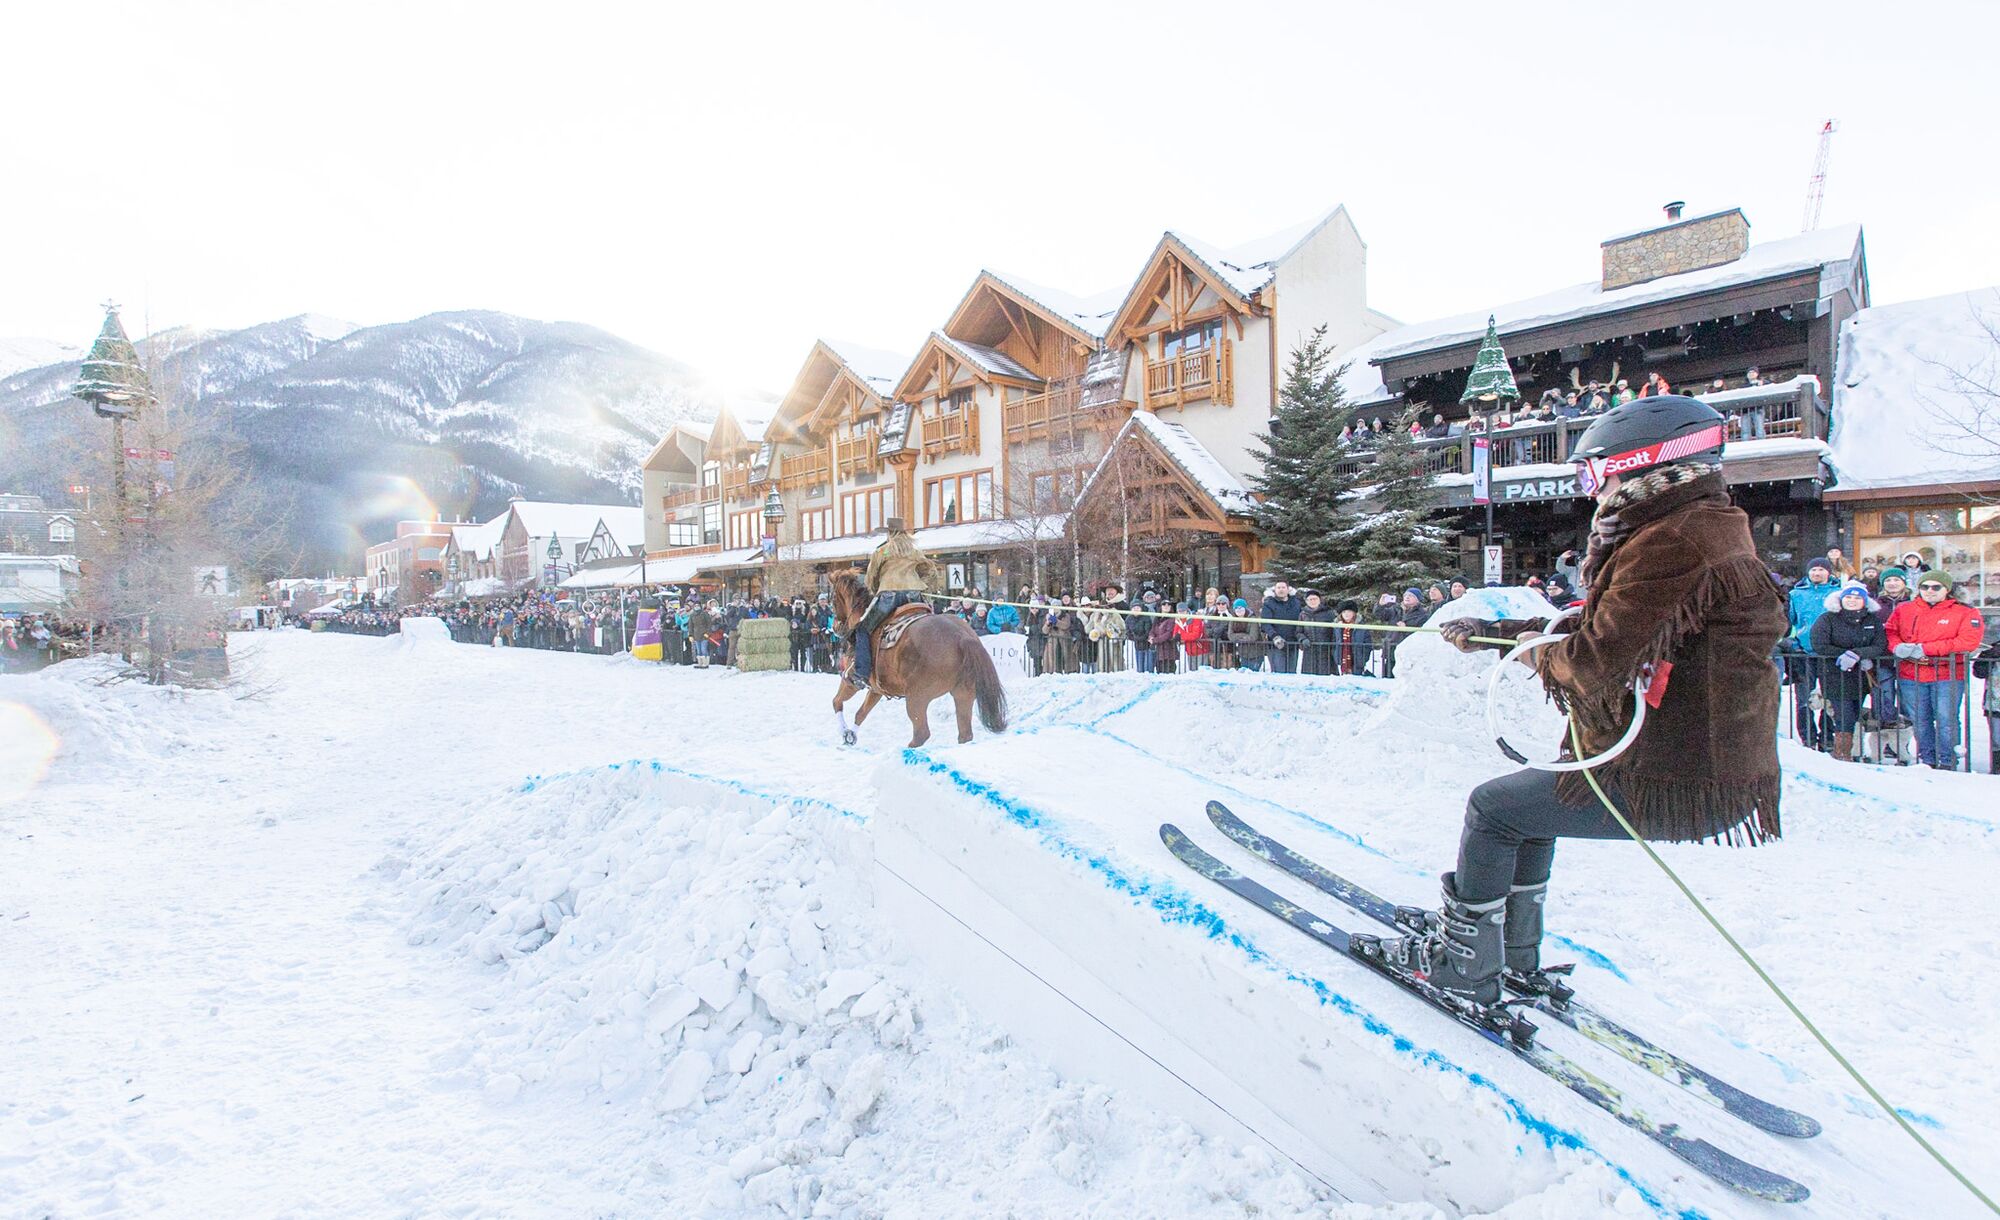 A skier performs a trick while being drawn by a horse during Snow Days Skijoring event on Banff Avenue